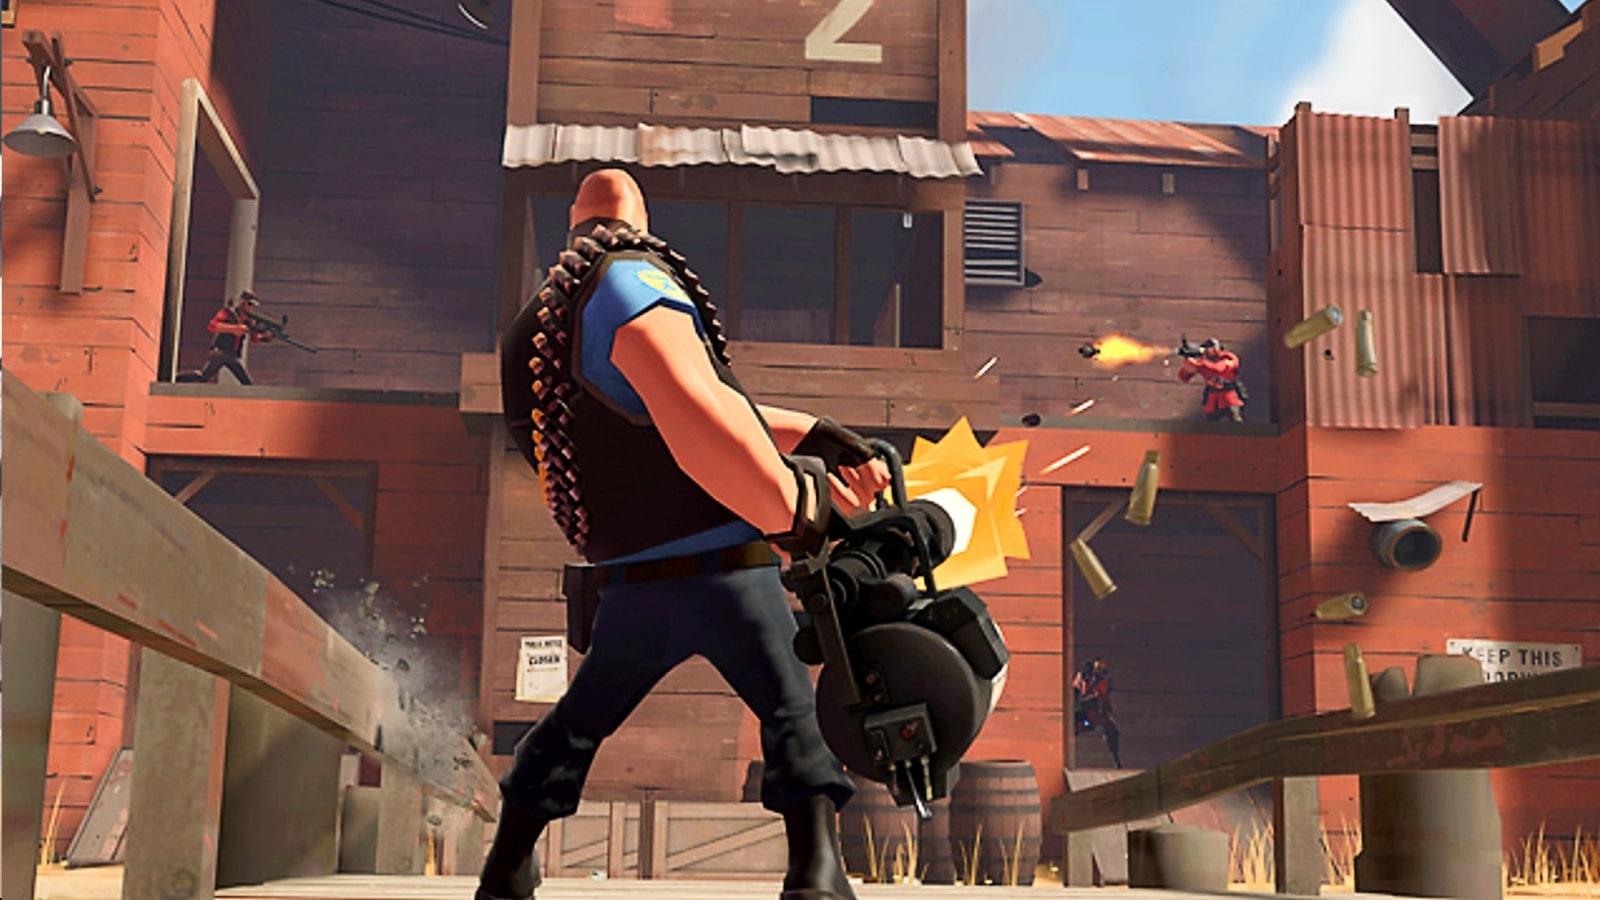 Team Fortress 2 image still feature